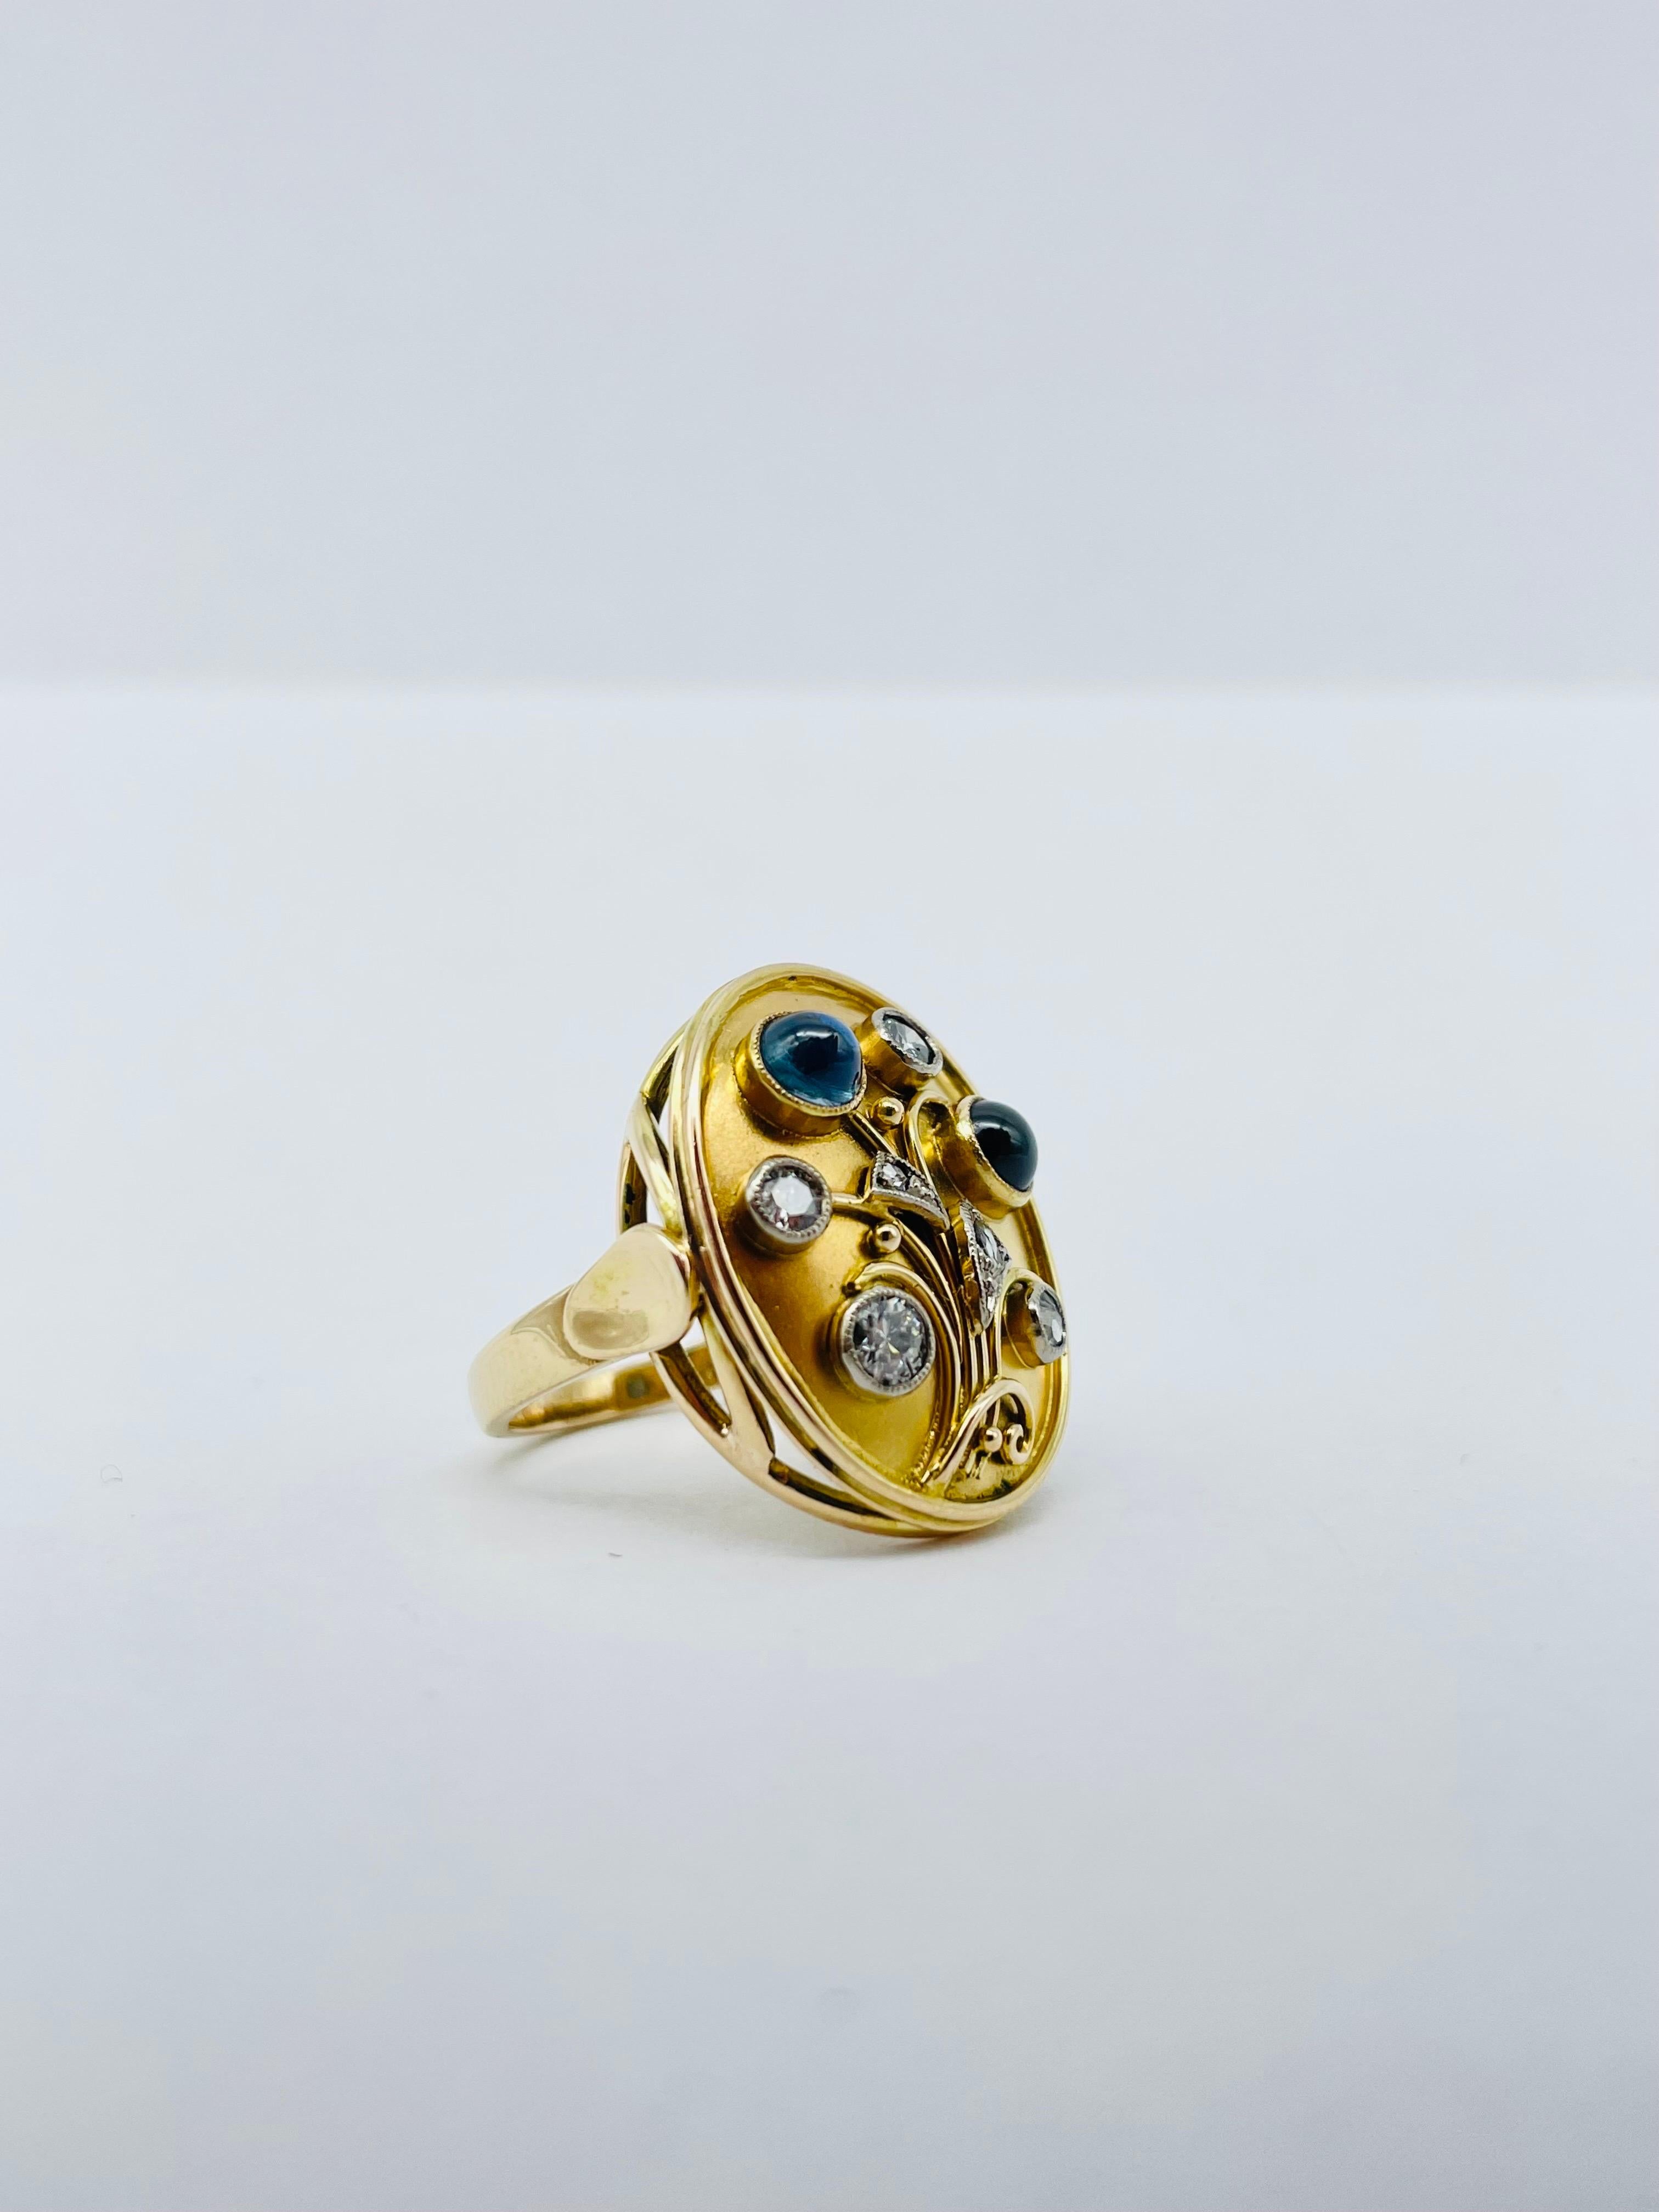 Fancy Cocktail Ring/Garden Ring in 14k Gold. This extraordinary piece of jewelry is a true work of art, designed to impress even the most discerning of tastes.

Crafted from the finest yellow gold, this ring features a breathtaking design that